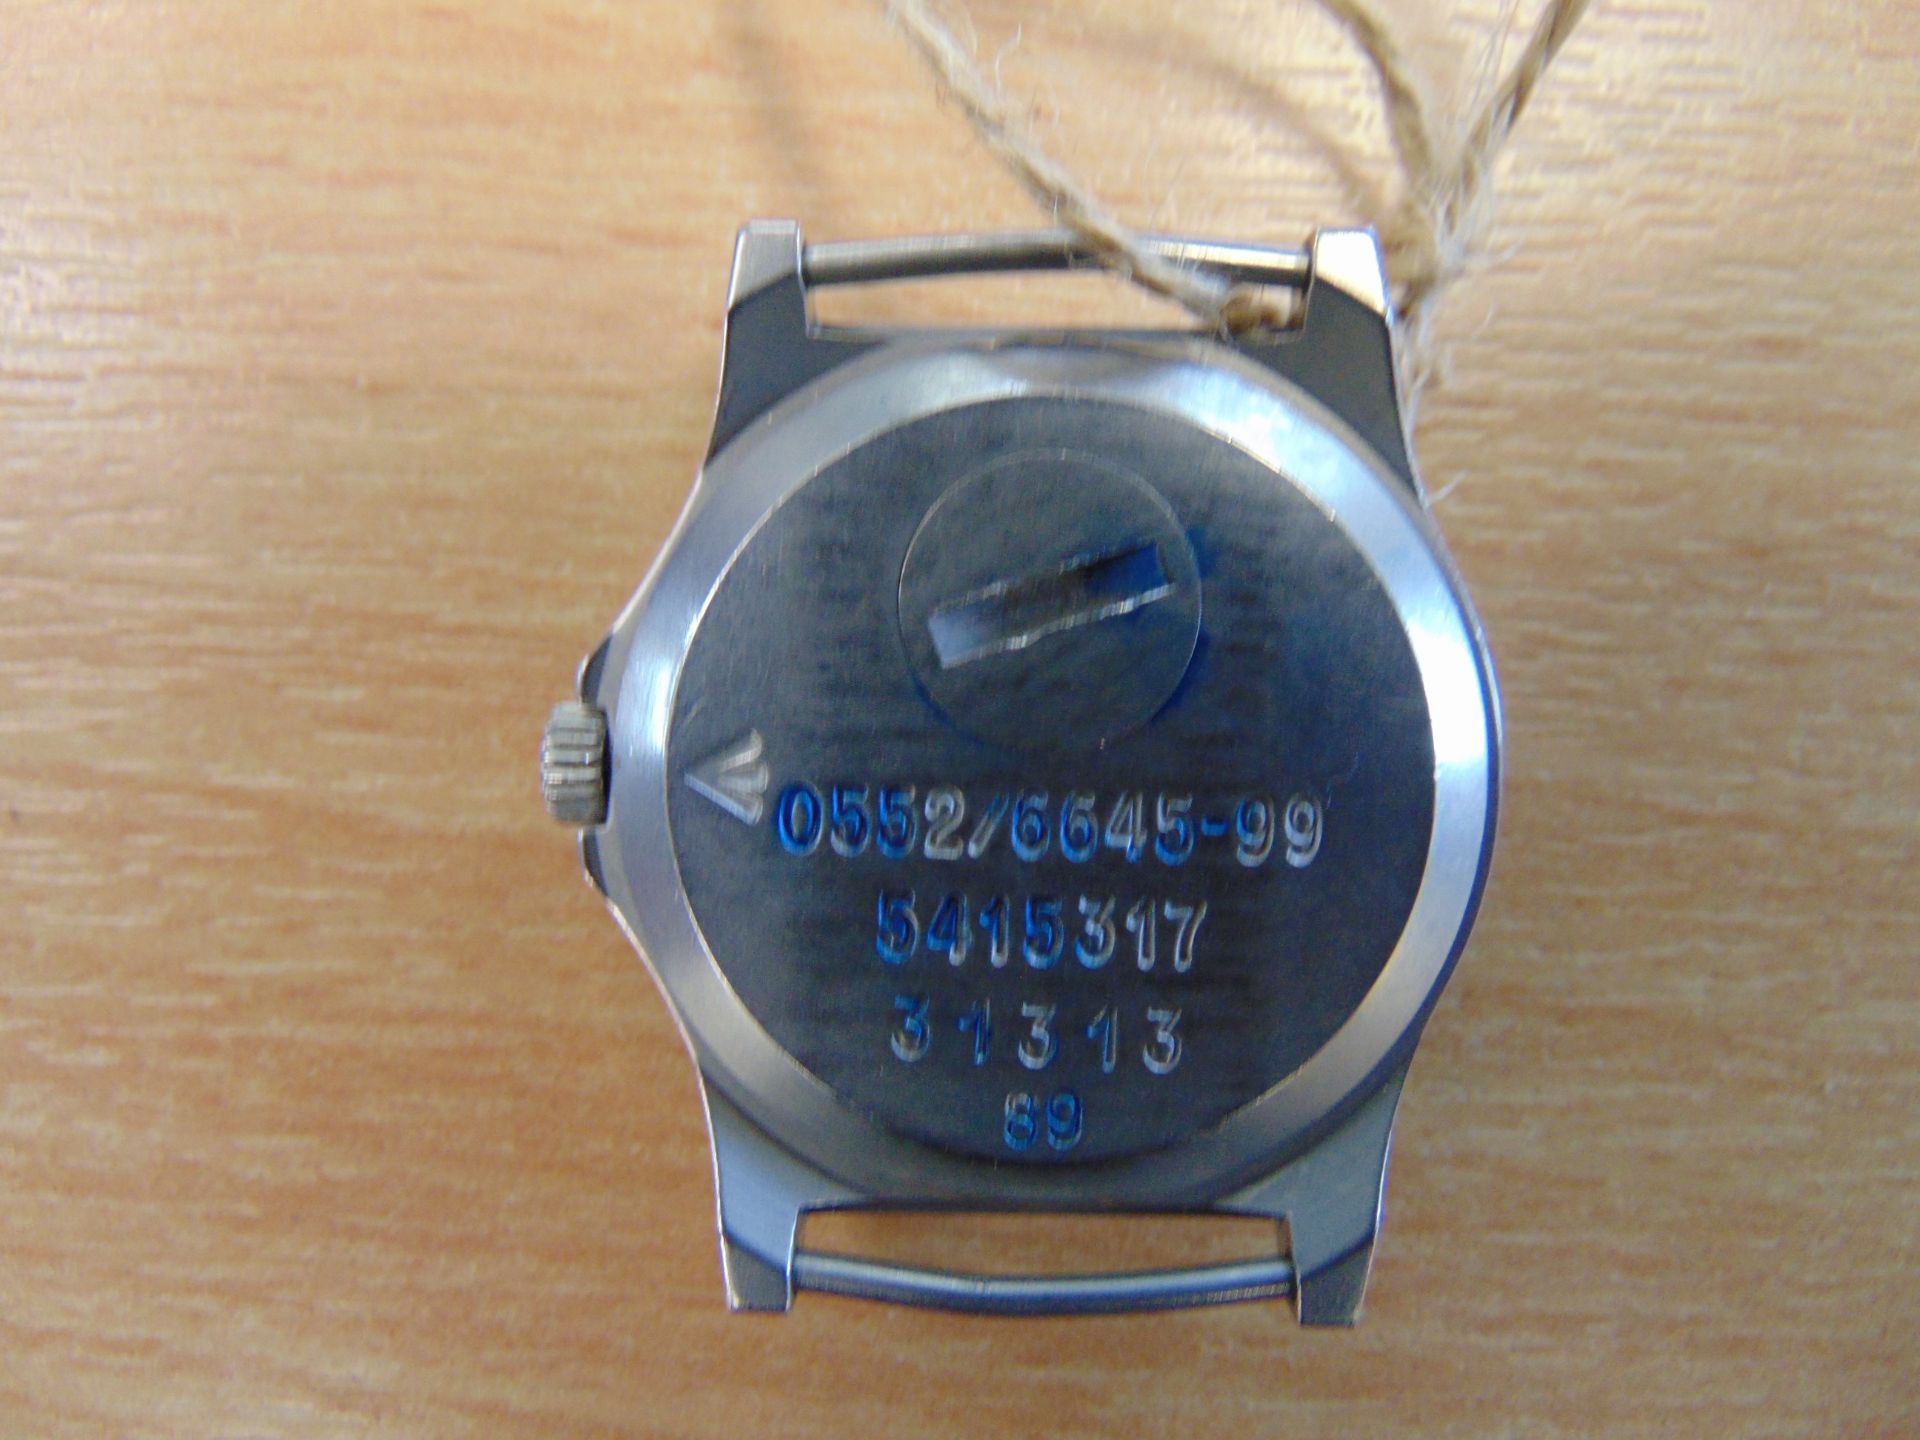 Rare CWC 0552 Royal Marines / Navy Issue Service Watch Nato Marks, Date 1990, * GULF WAR 1 * - Image 4 of 5